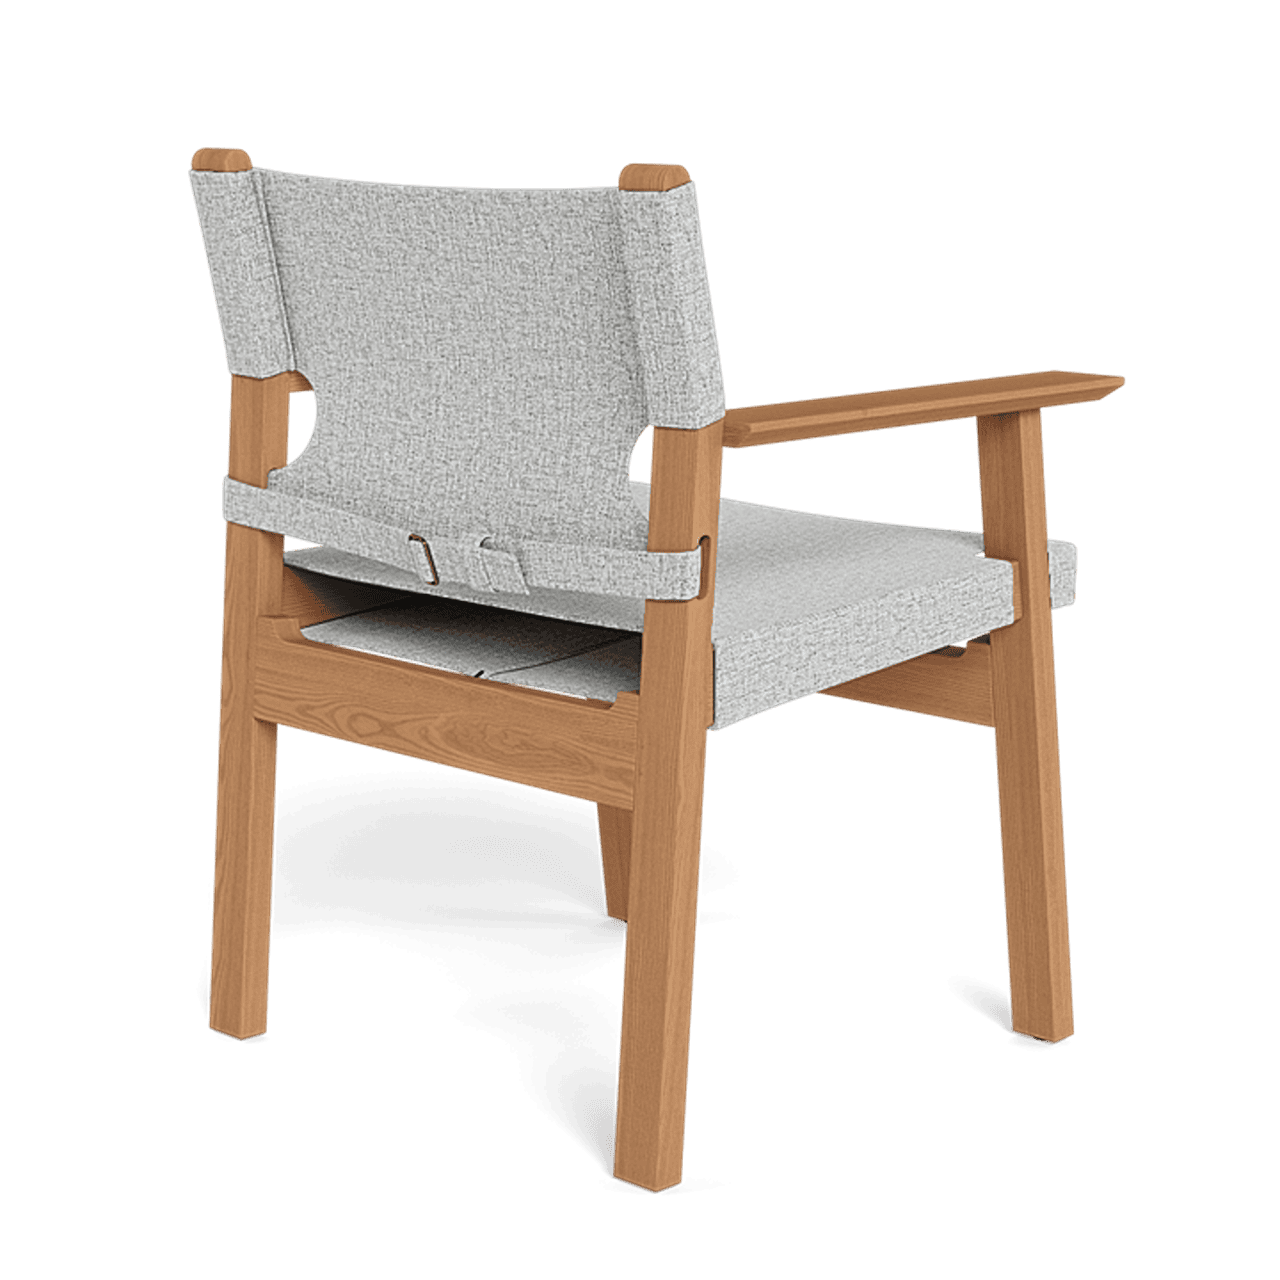 MLB DINING CHAIR-Teak natural frame with copacabana sand fabric